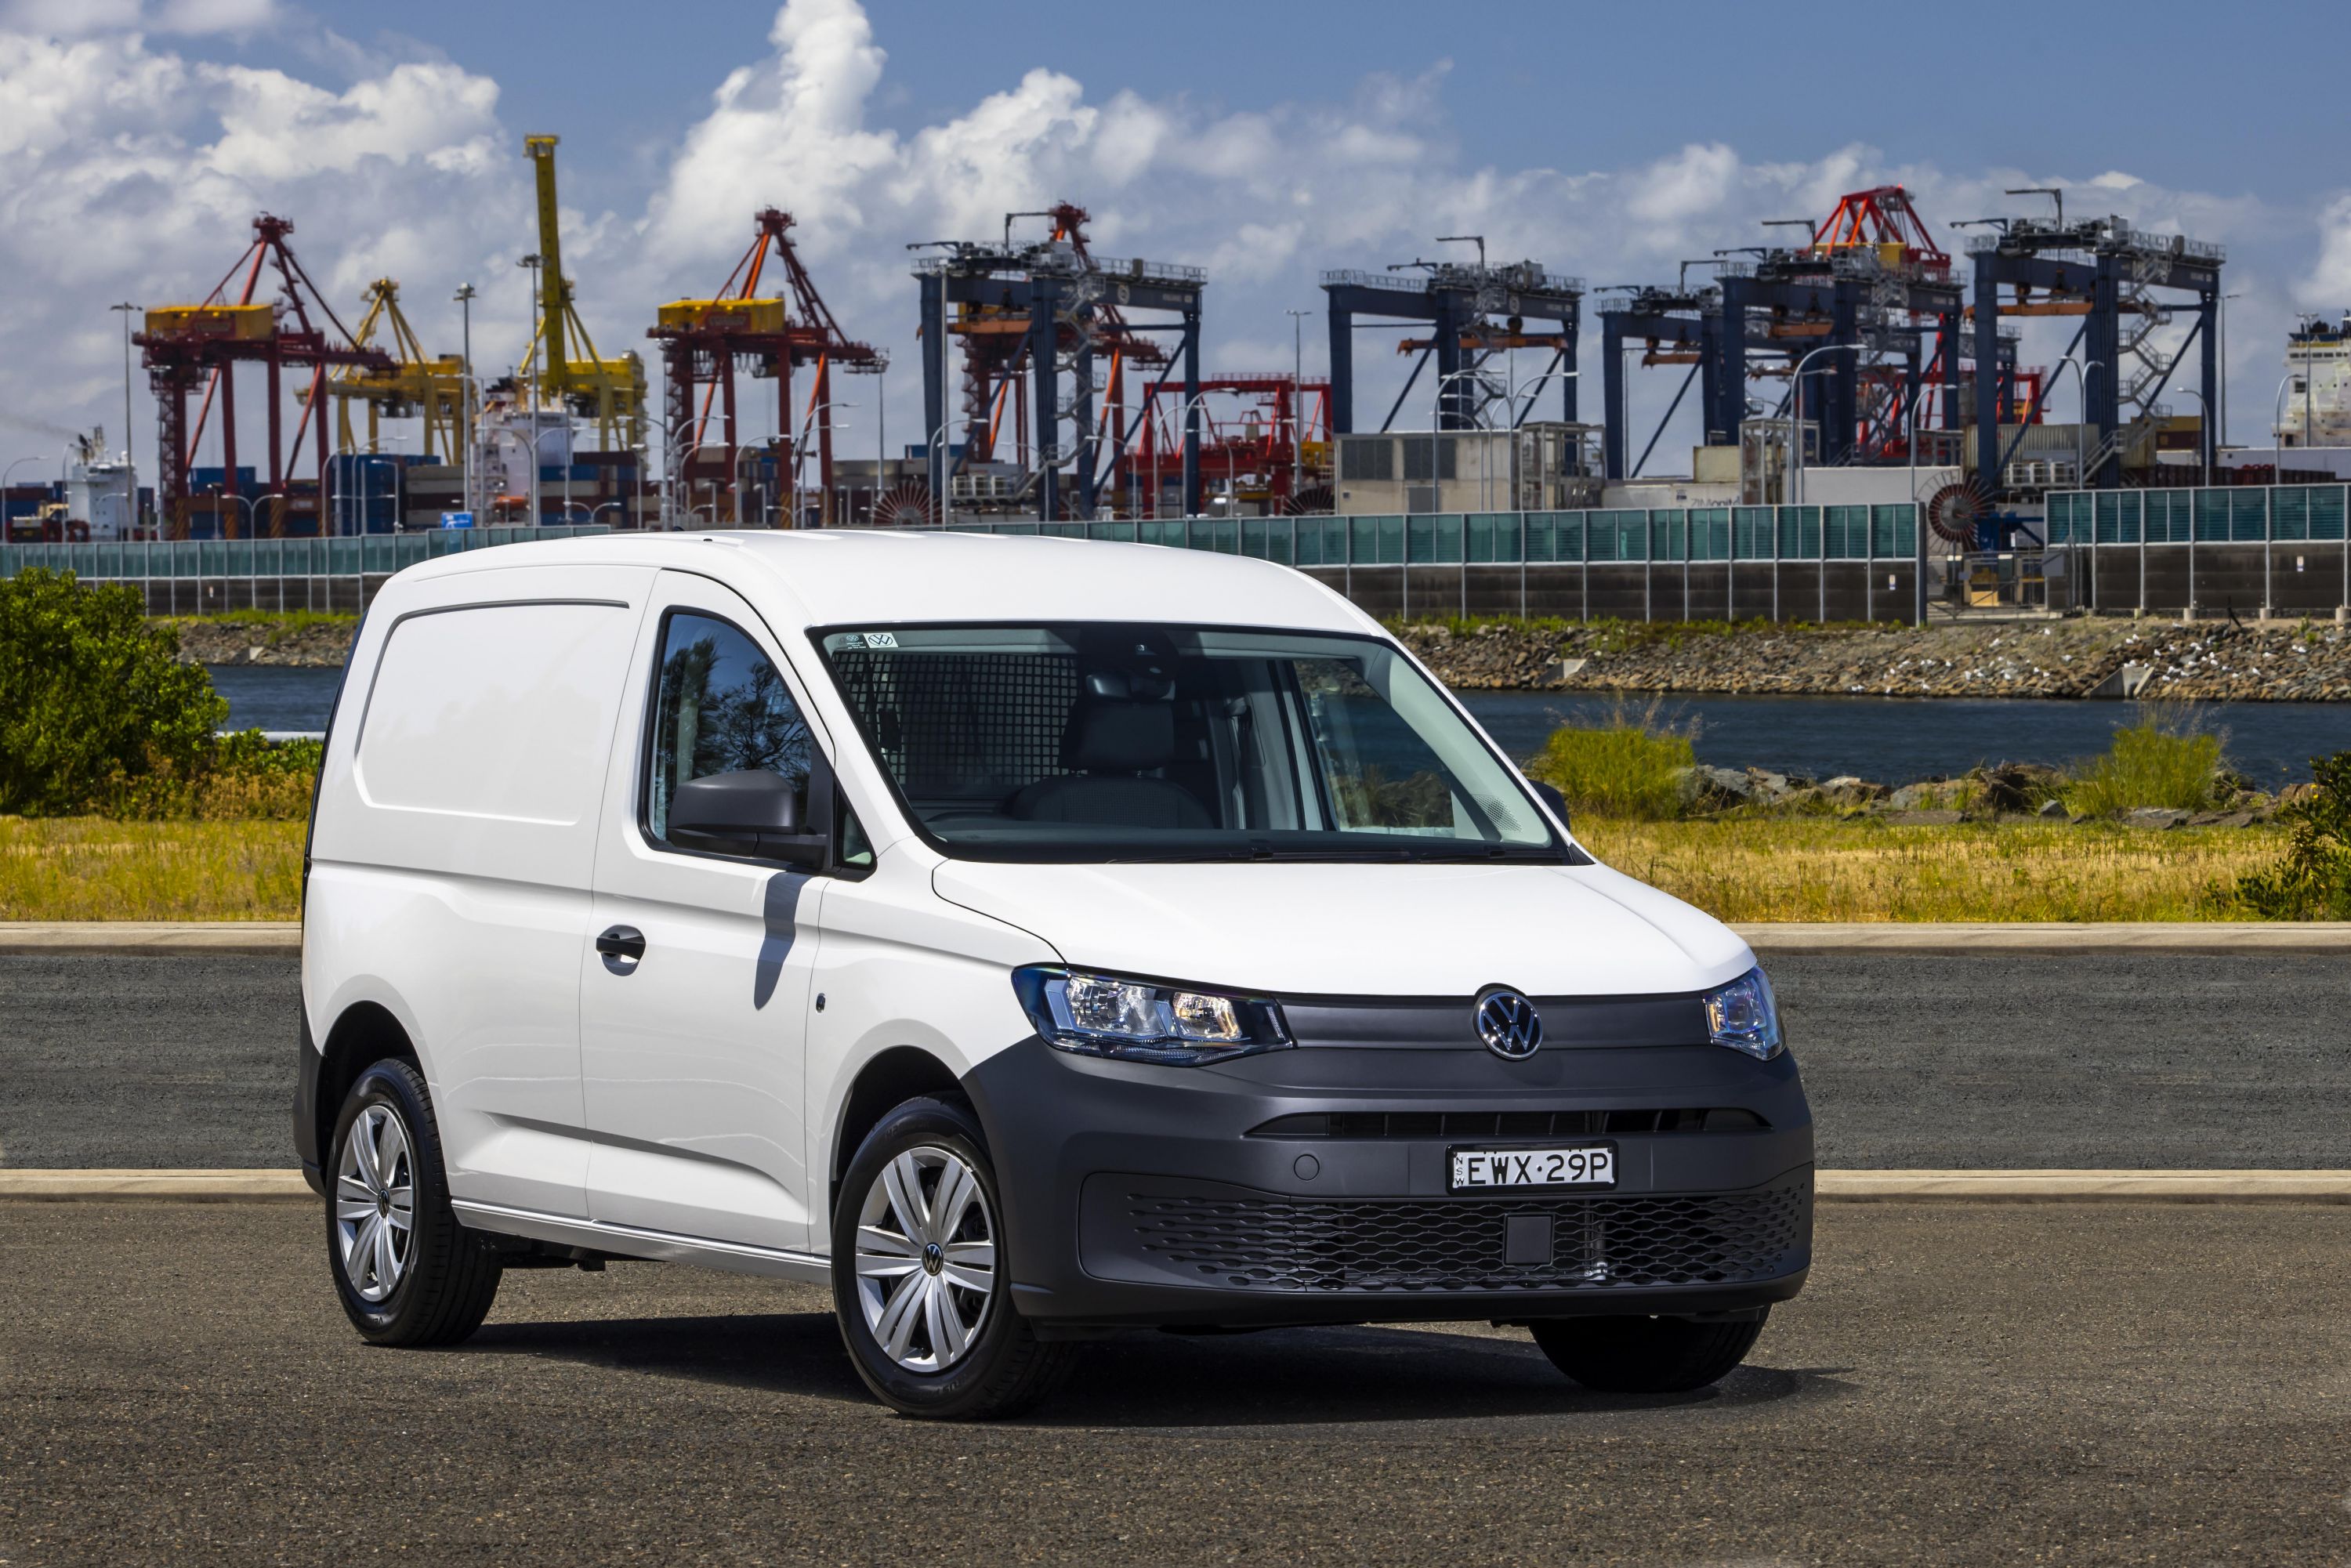 VW Caddy Review, For Sale, Colours, Specs & Models in Australia